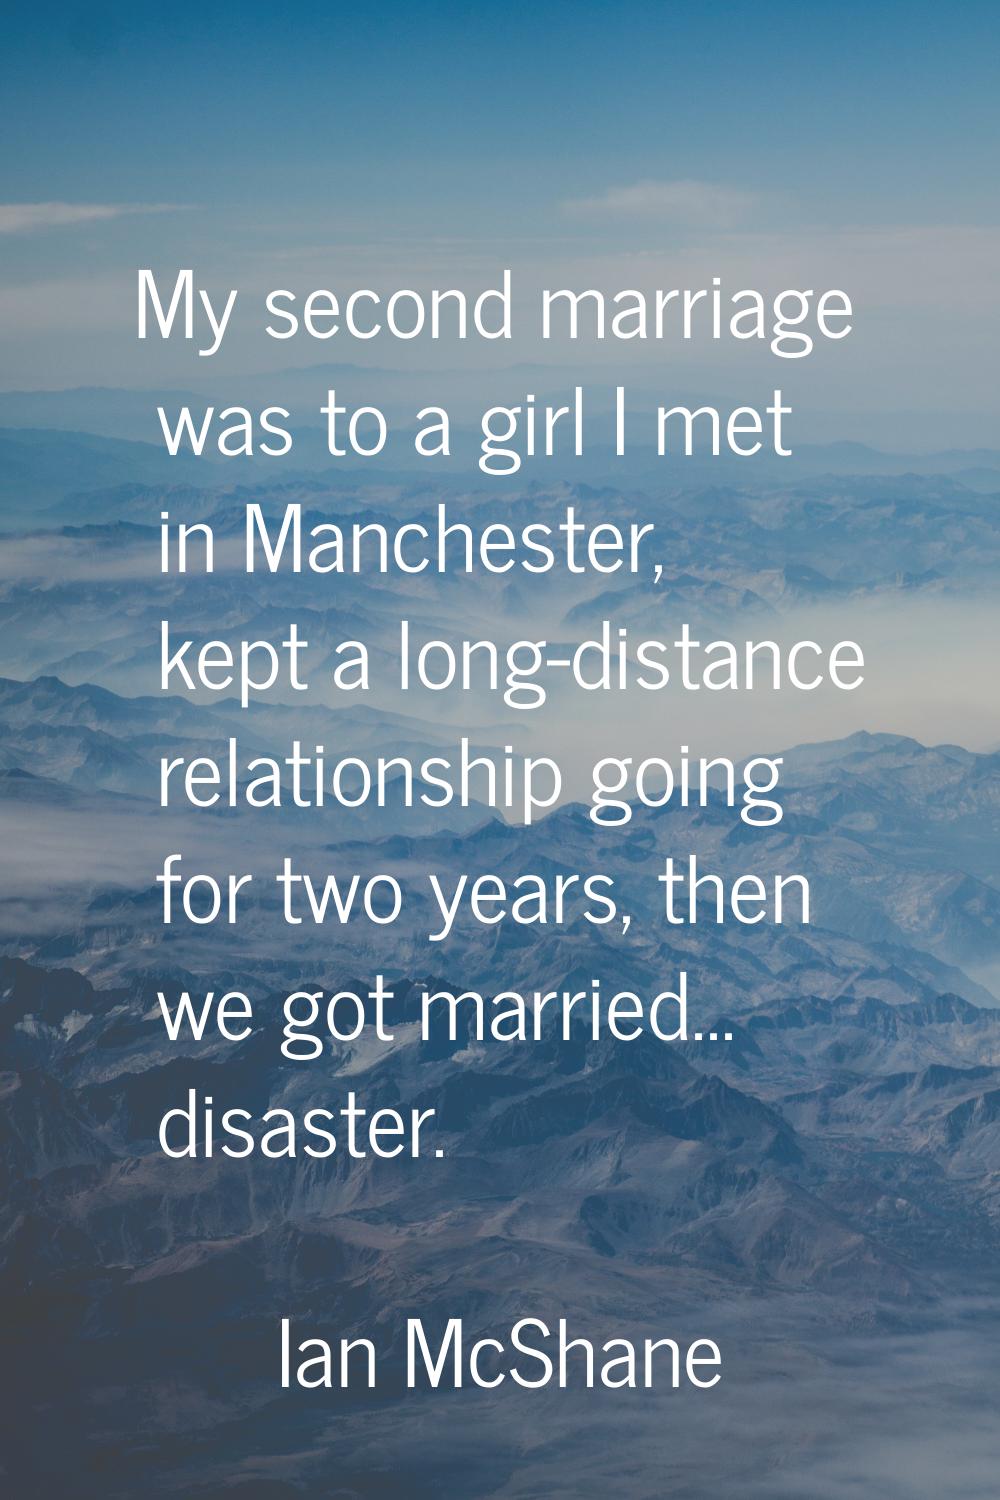 My second marriage was to a girl I met in Manchester, kept a long-distance relationship going for t